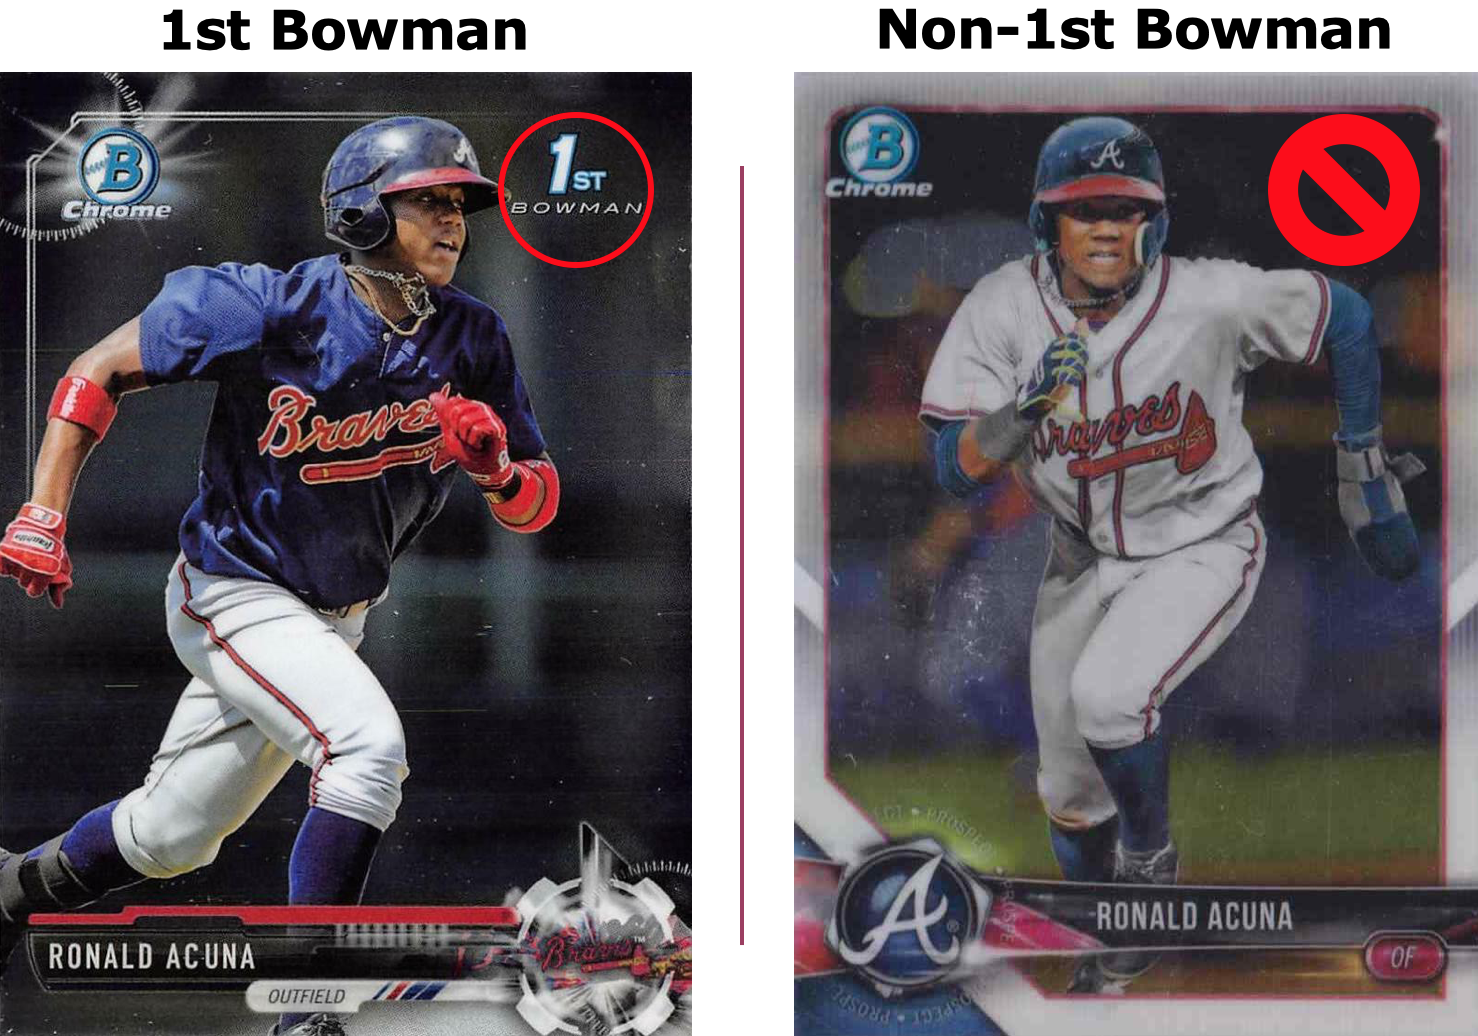 Never opened Bowman Chrome. No clue on prospects. How did I do? :  r/baseballcards